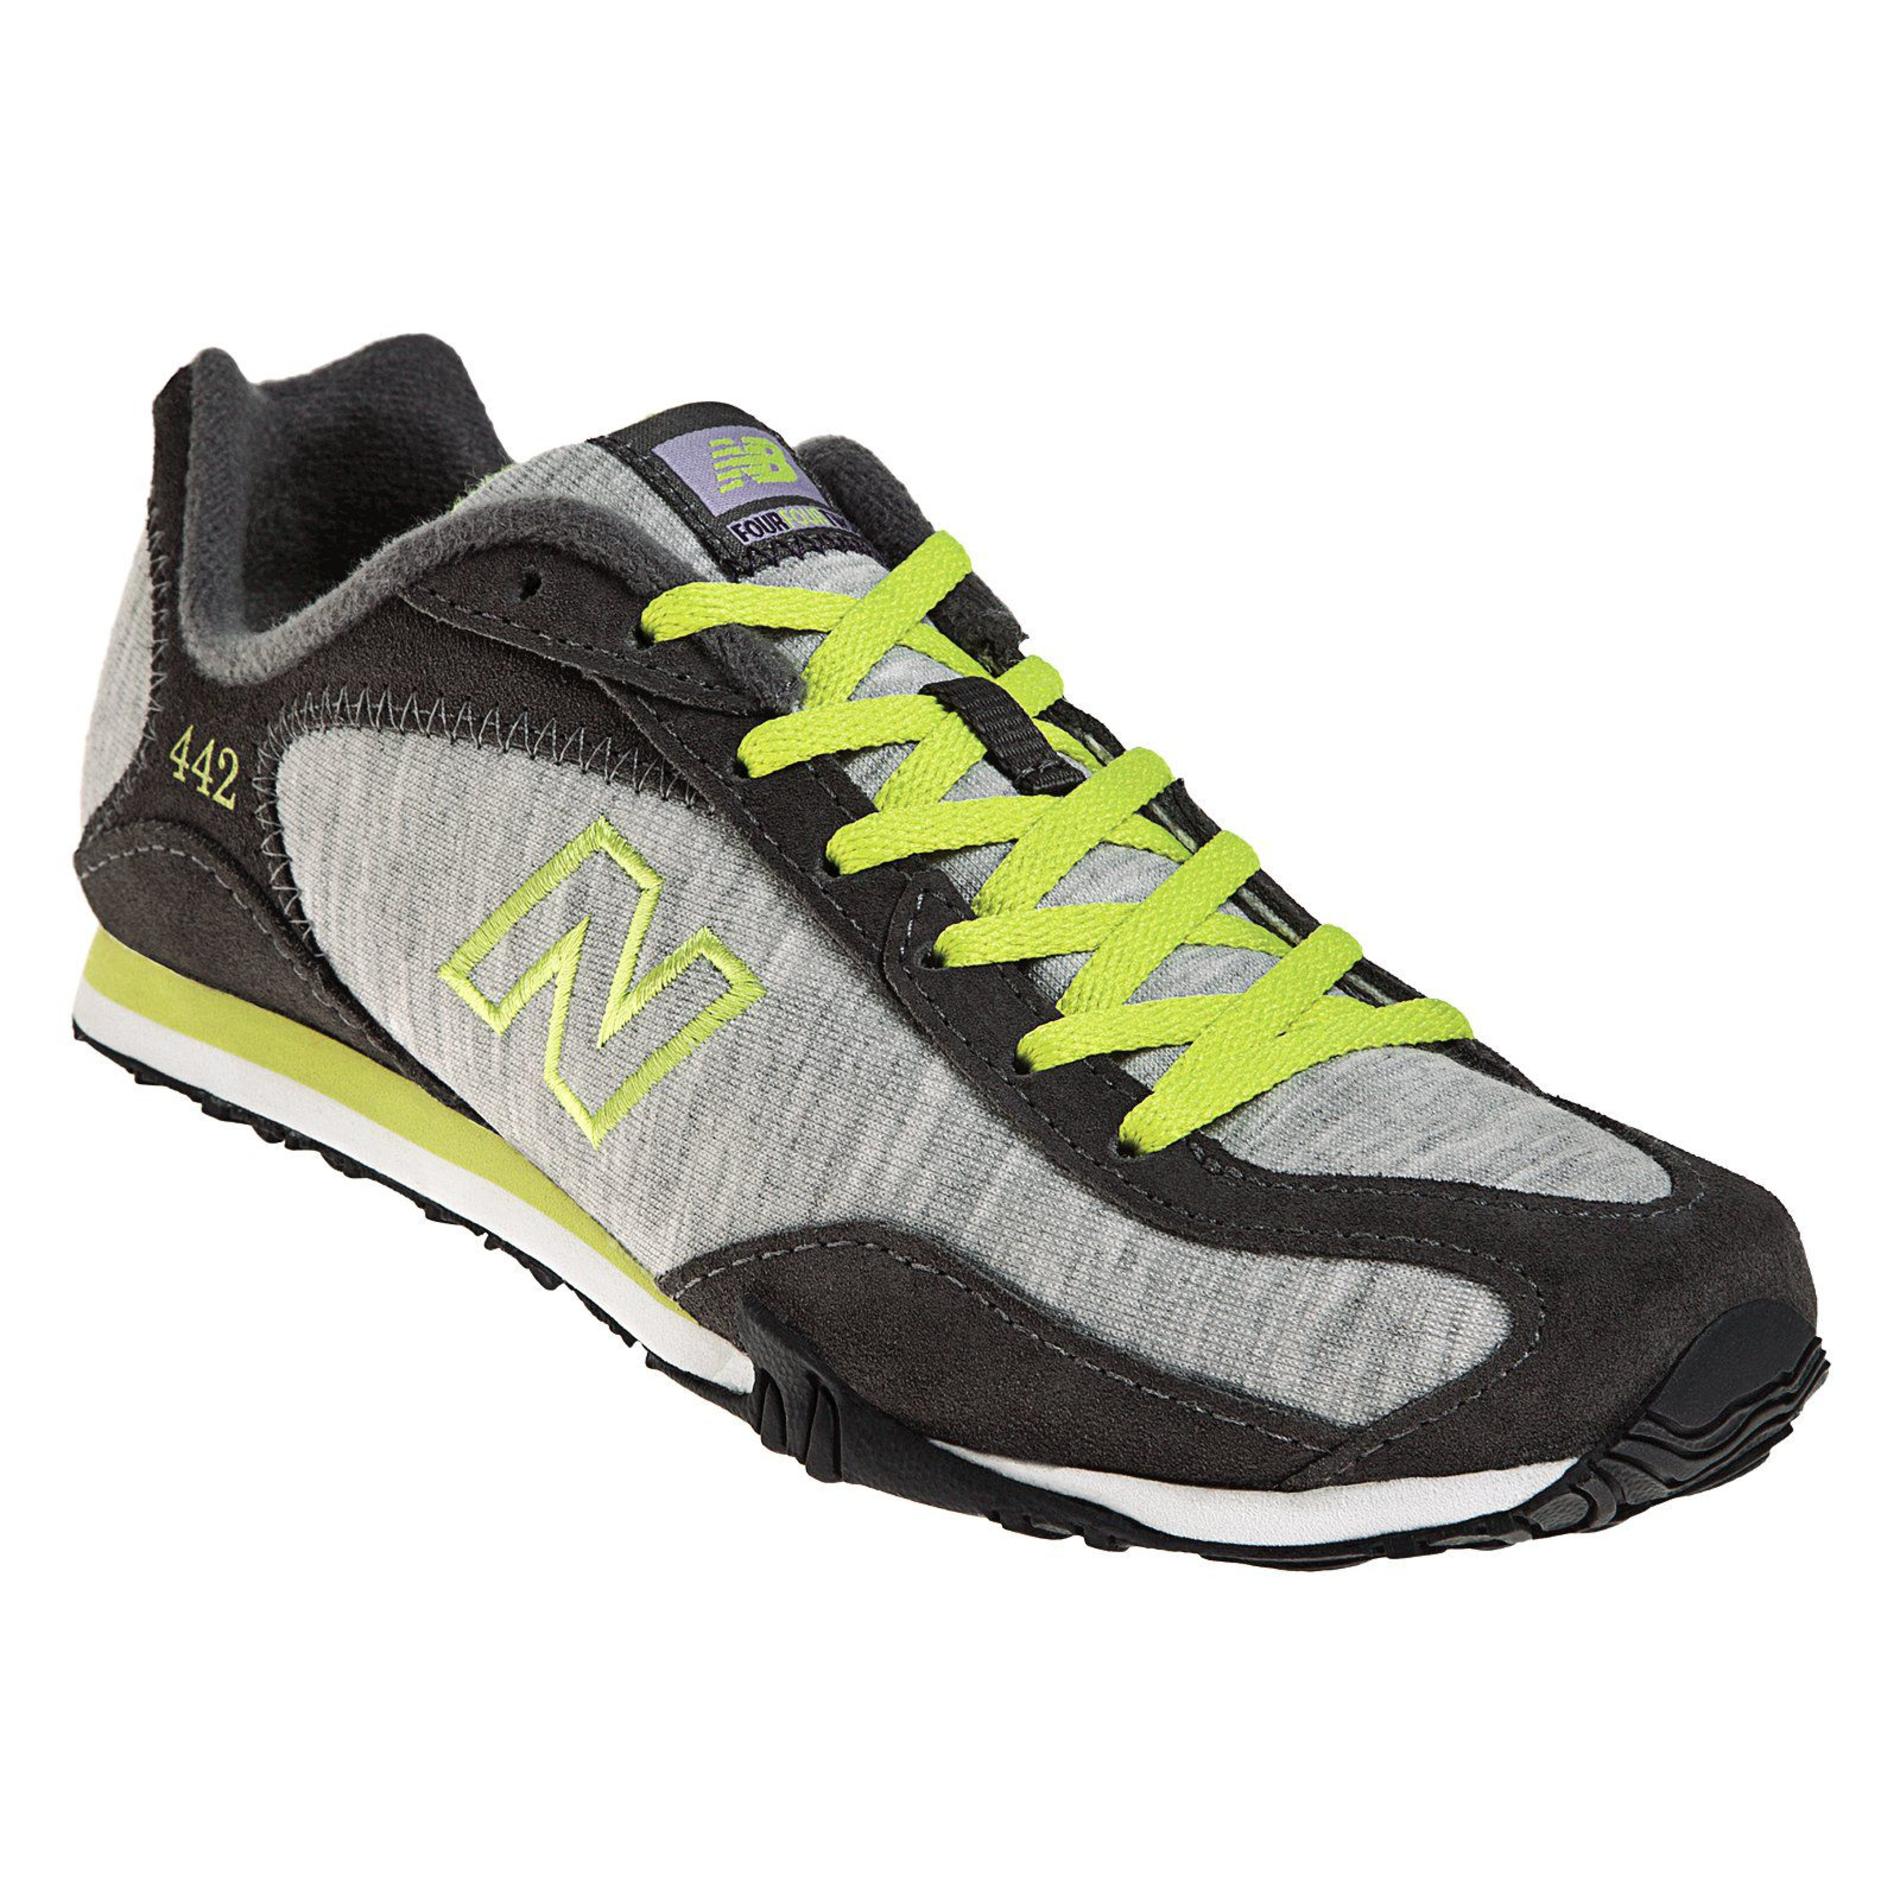 New Balance Women's 442 Casual Athletic Shoe - Grey/Lime Green